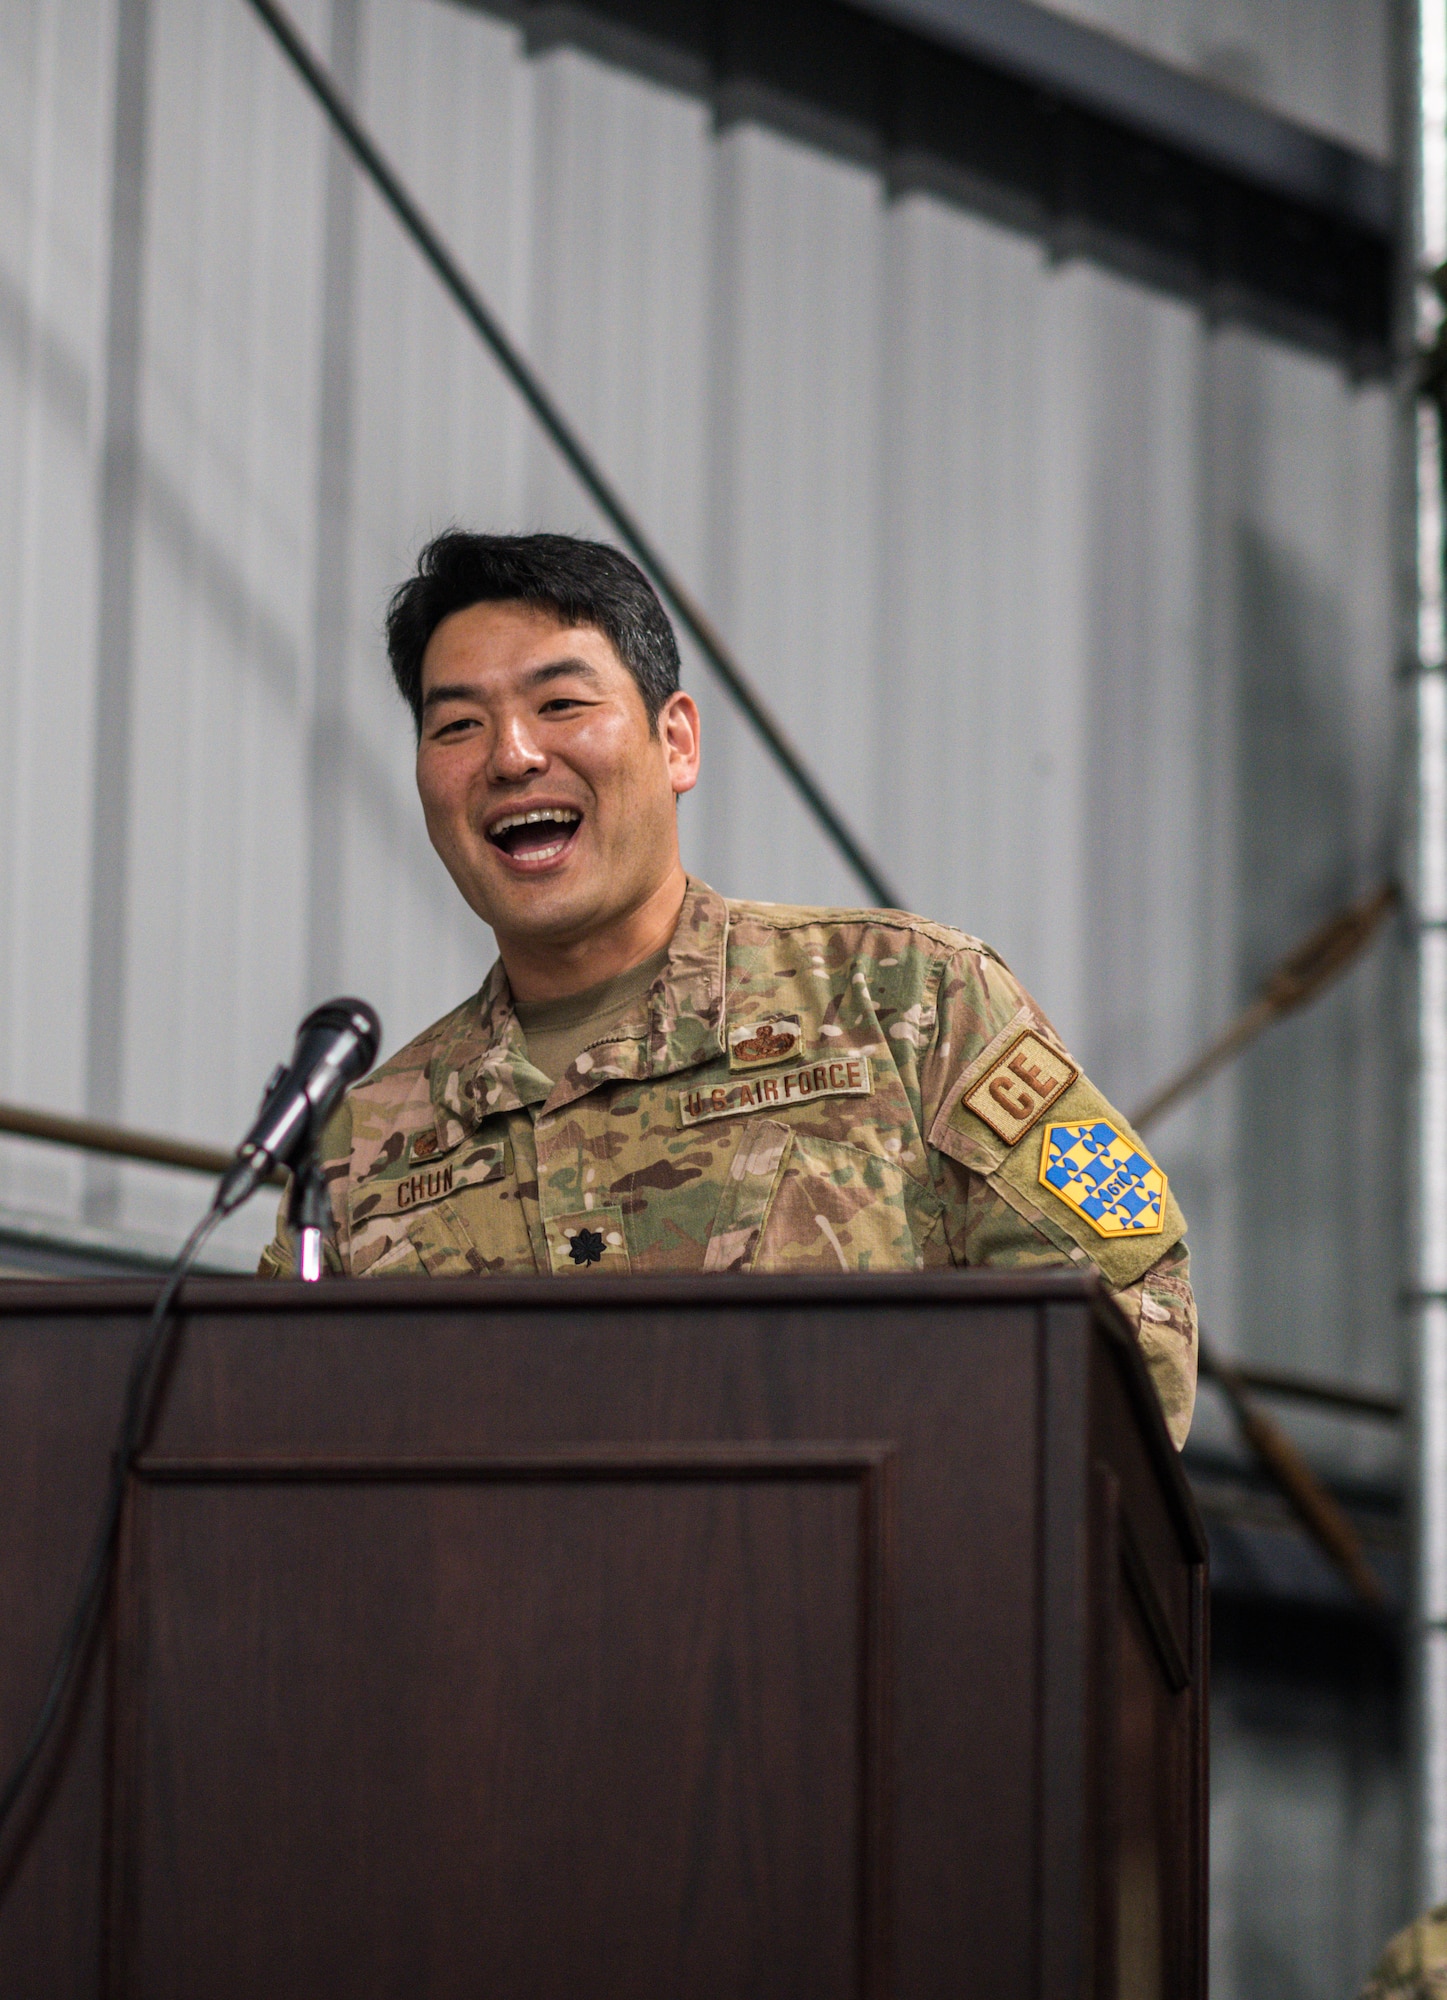 Outgoing 61st CELS commander Lt. Col. Woo Chun gives his final remarks to the audience during his change of command ceremony which was held in their warehouse on Monday.